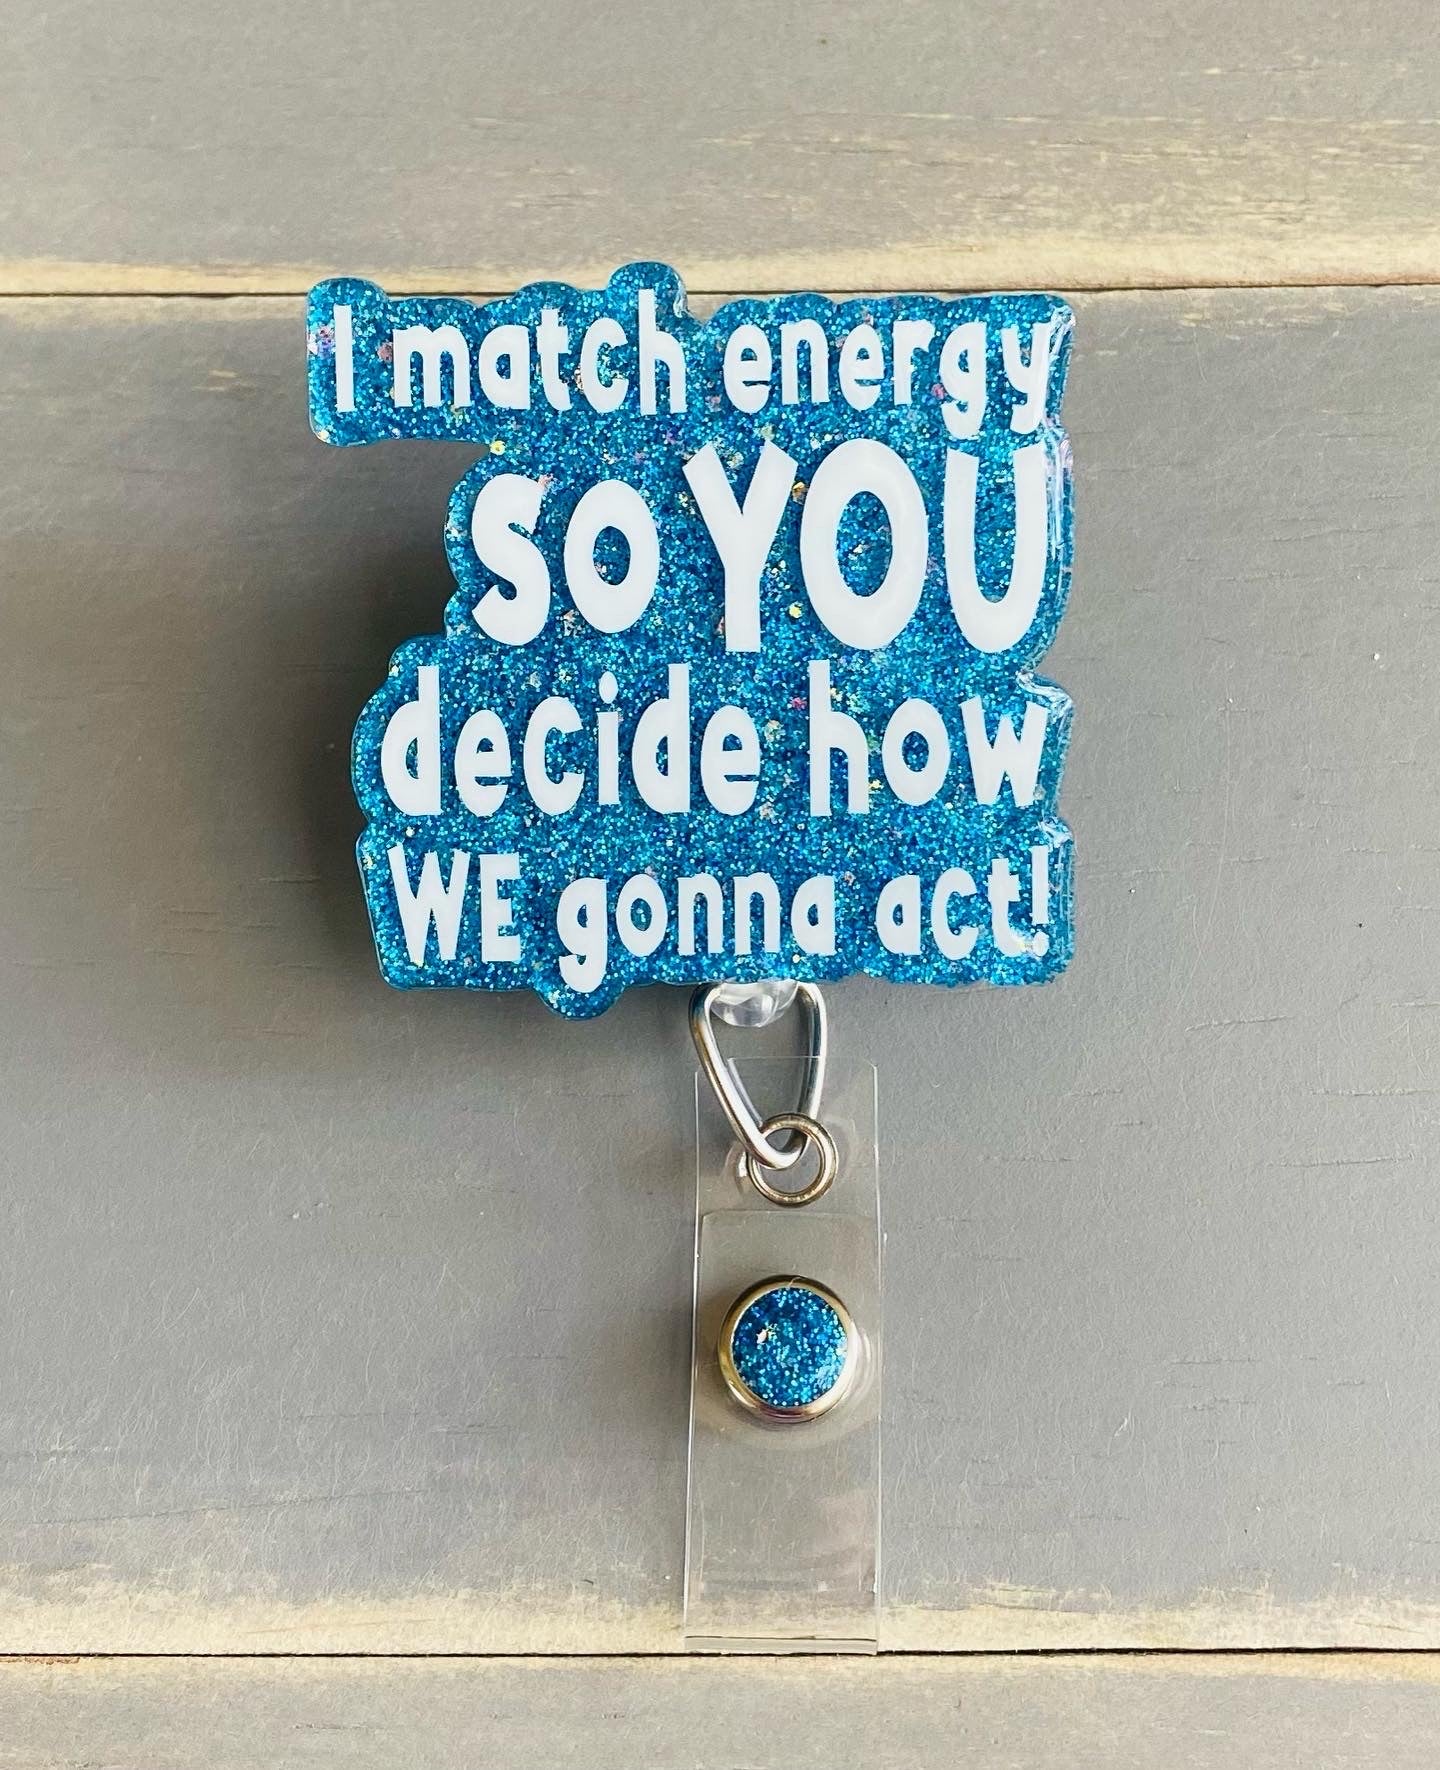 I Match Energy So You Decide How We Gonna Act Badge Reel